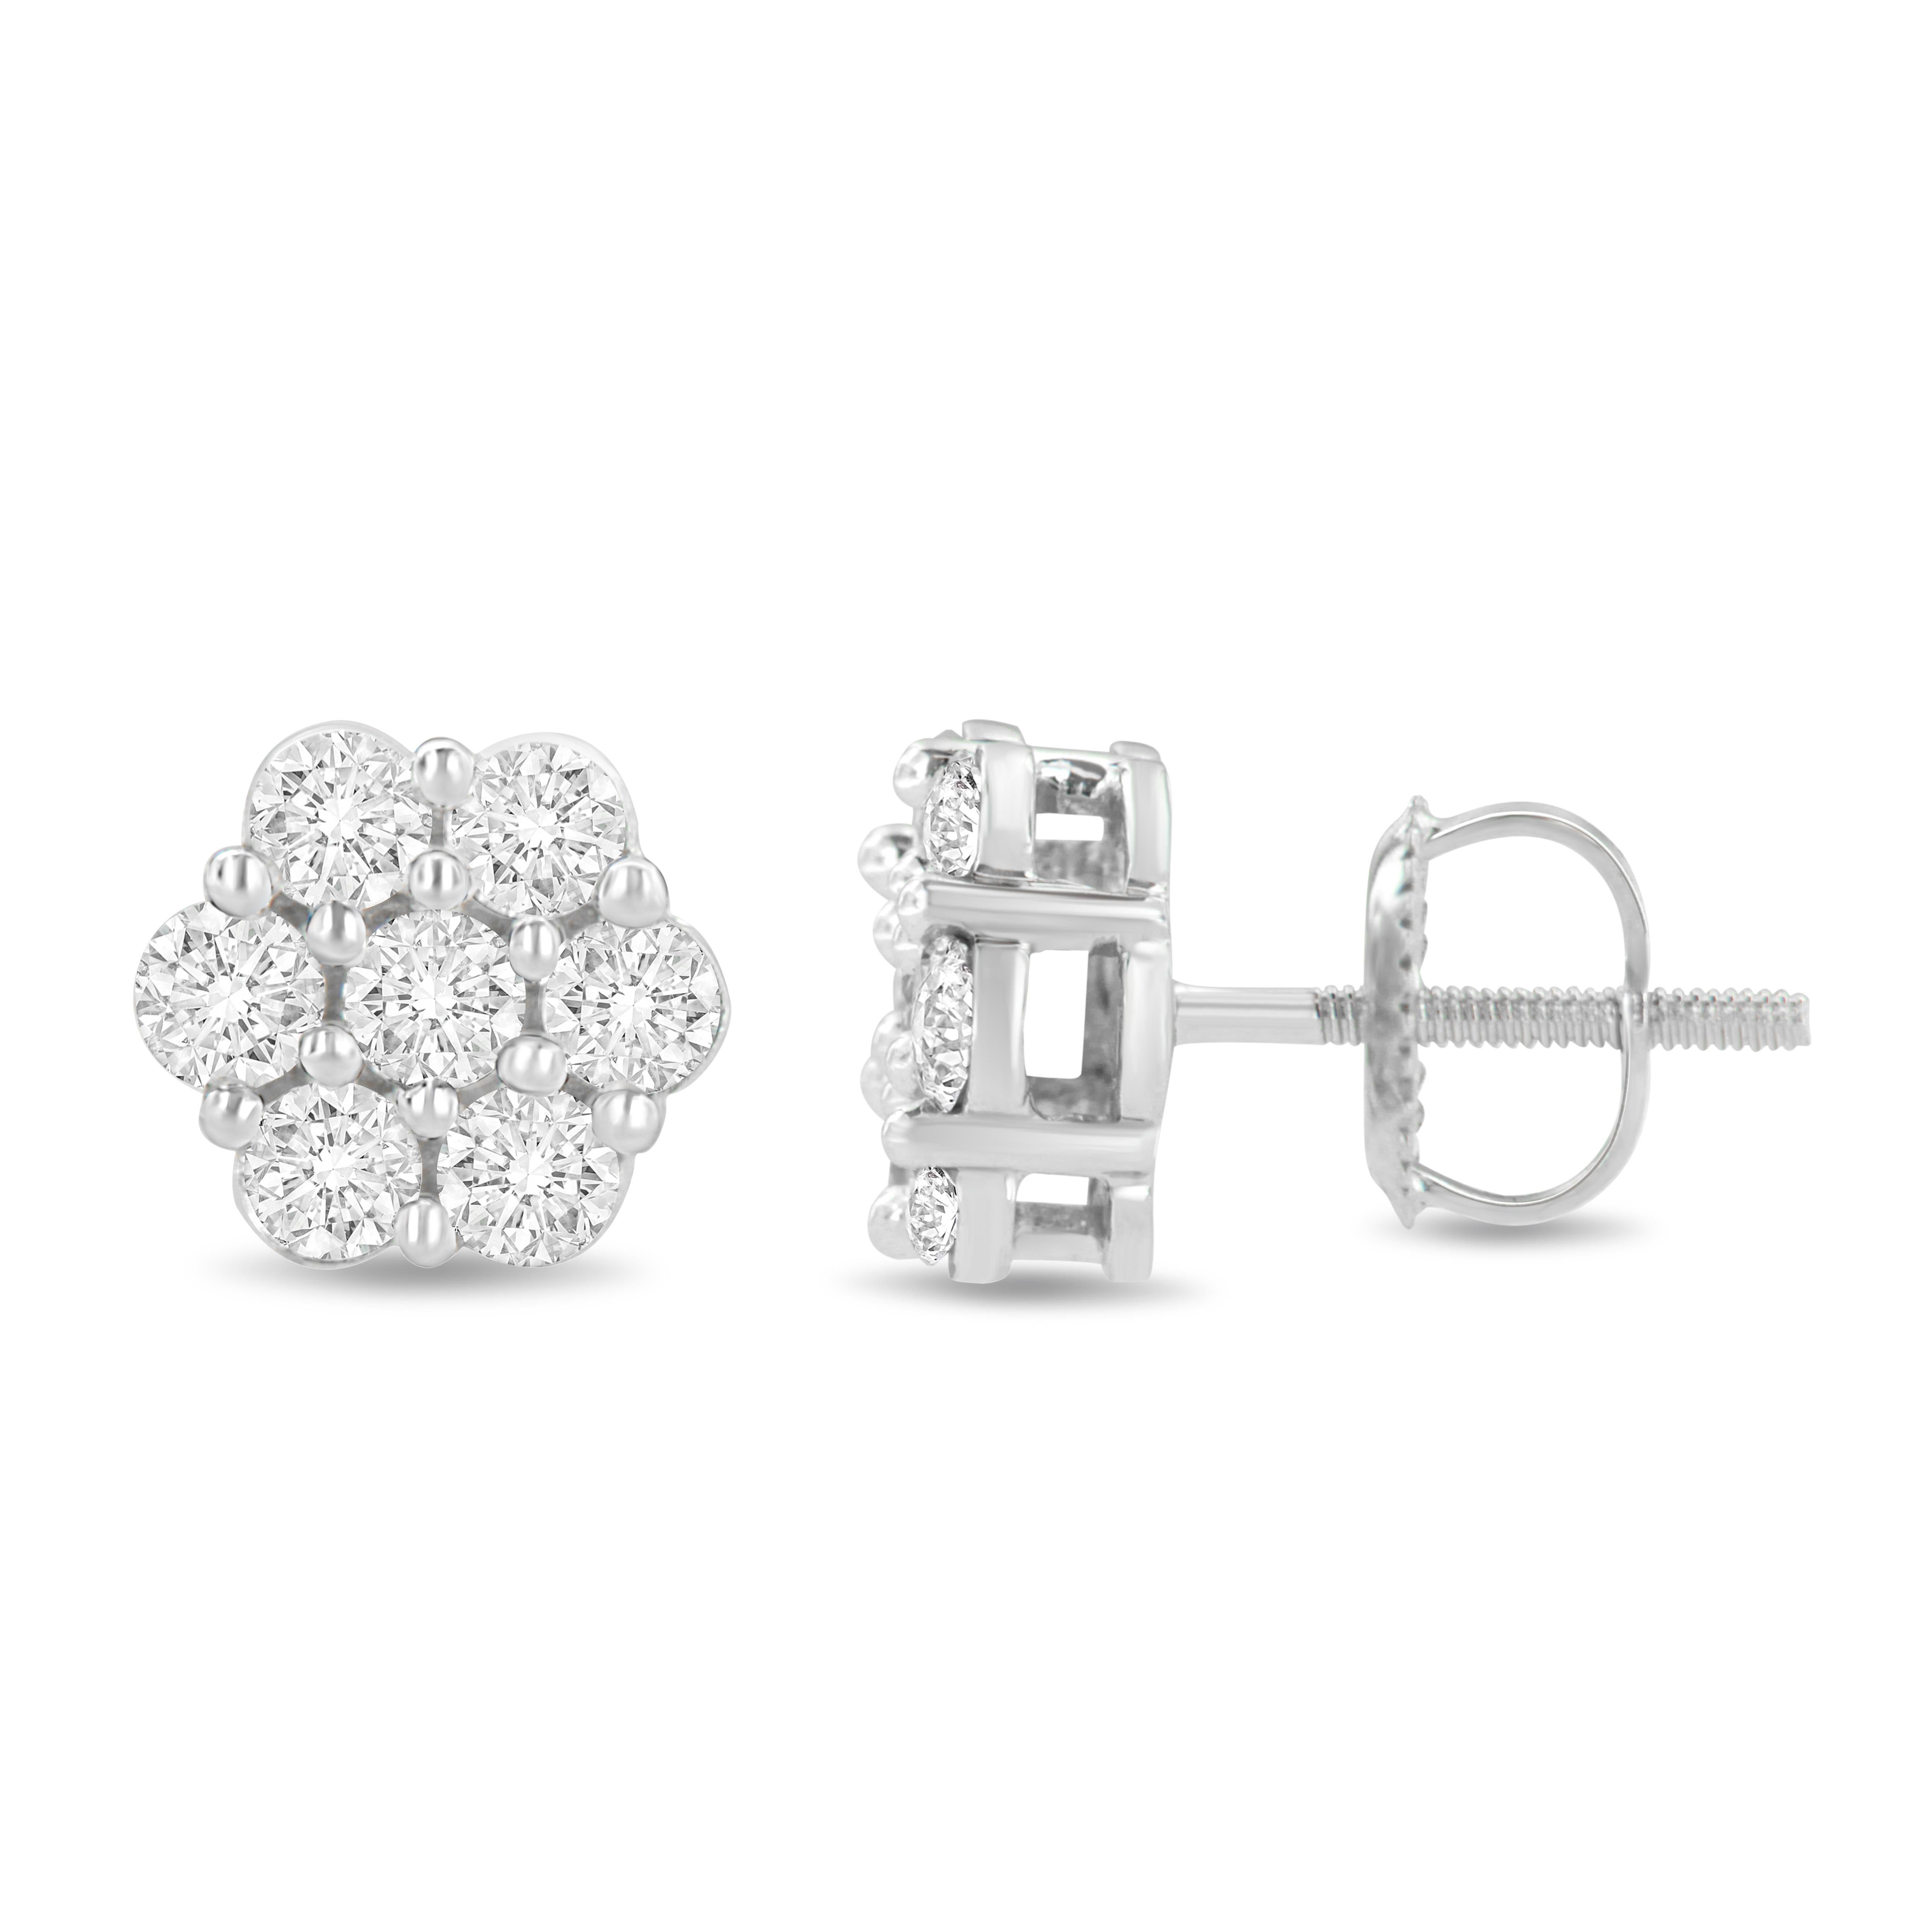 You will fall in love with these classic cluster stud earrings. A must have for any serious jewelry collection, these 14k white gold boast an impressive 1.0carat total weight of natural diamonds with seven stones each. The earrings are floral